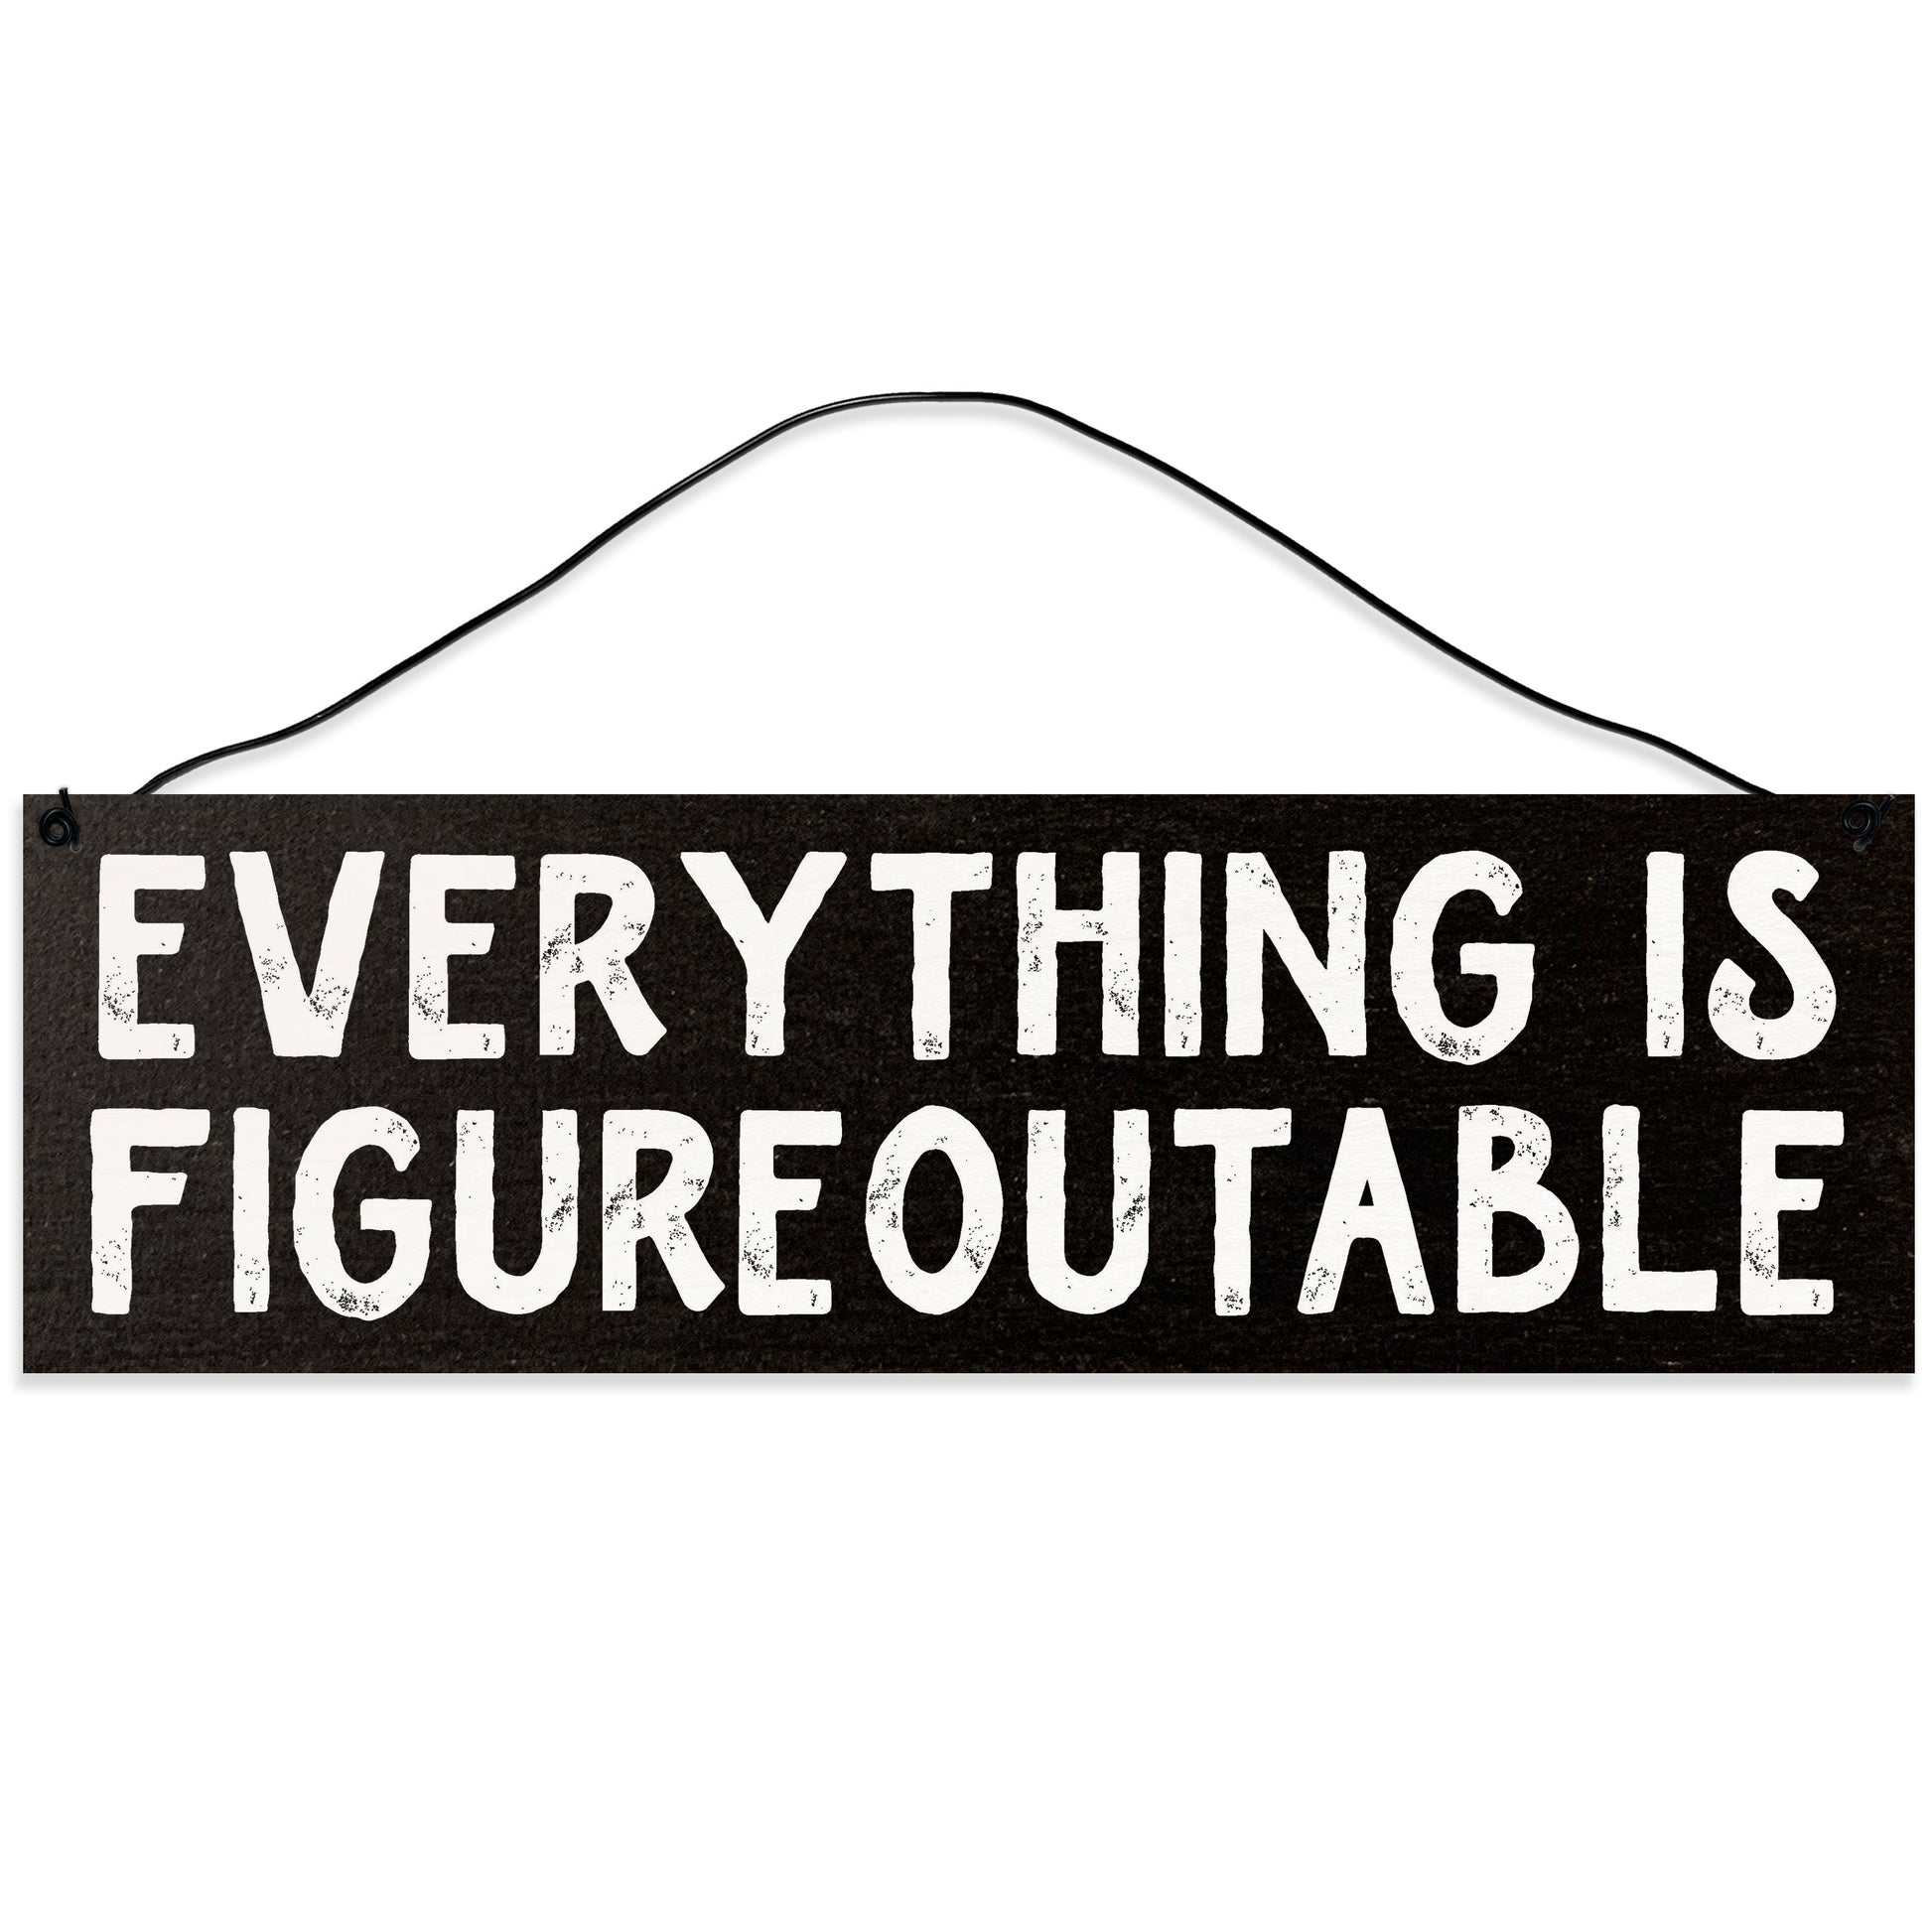 Sawyer's Mill - Everything is Figureoutable. Wood Sign for Home or Office. Measures 3x10 inches.